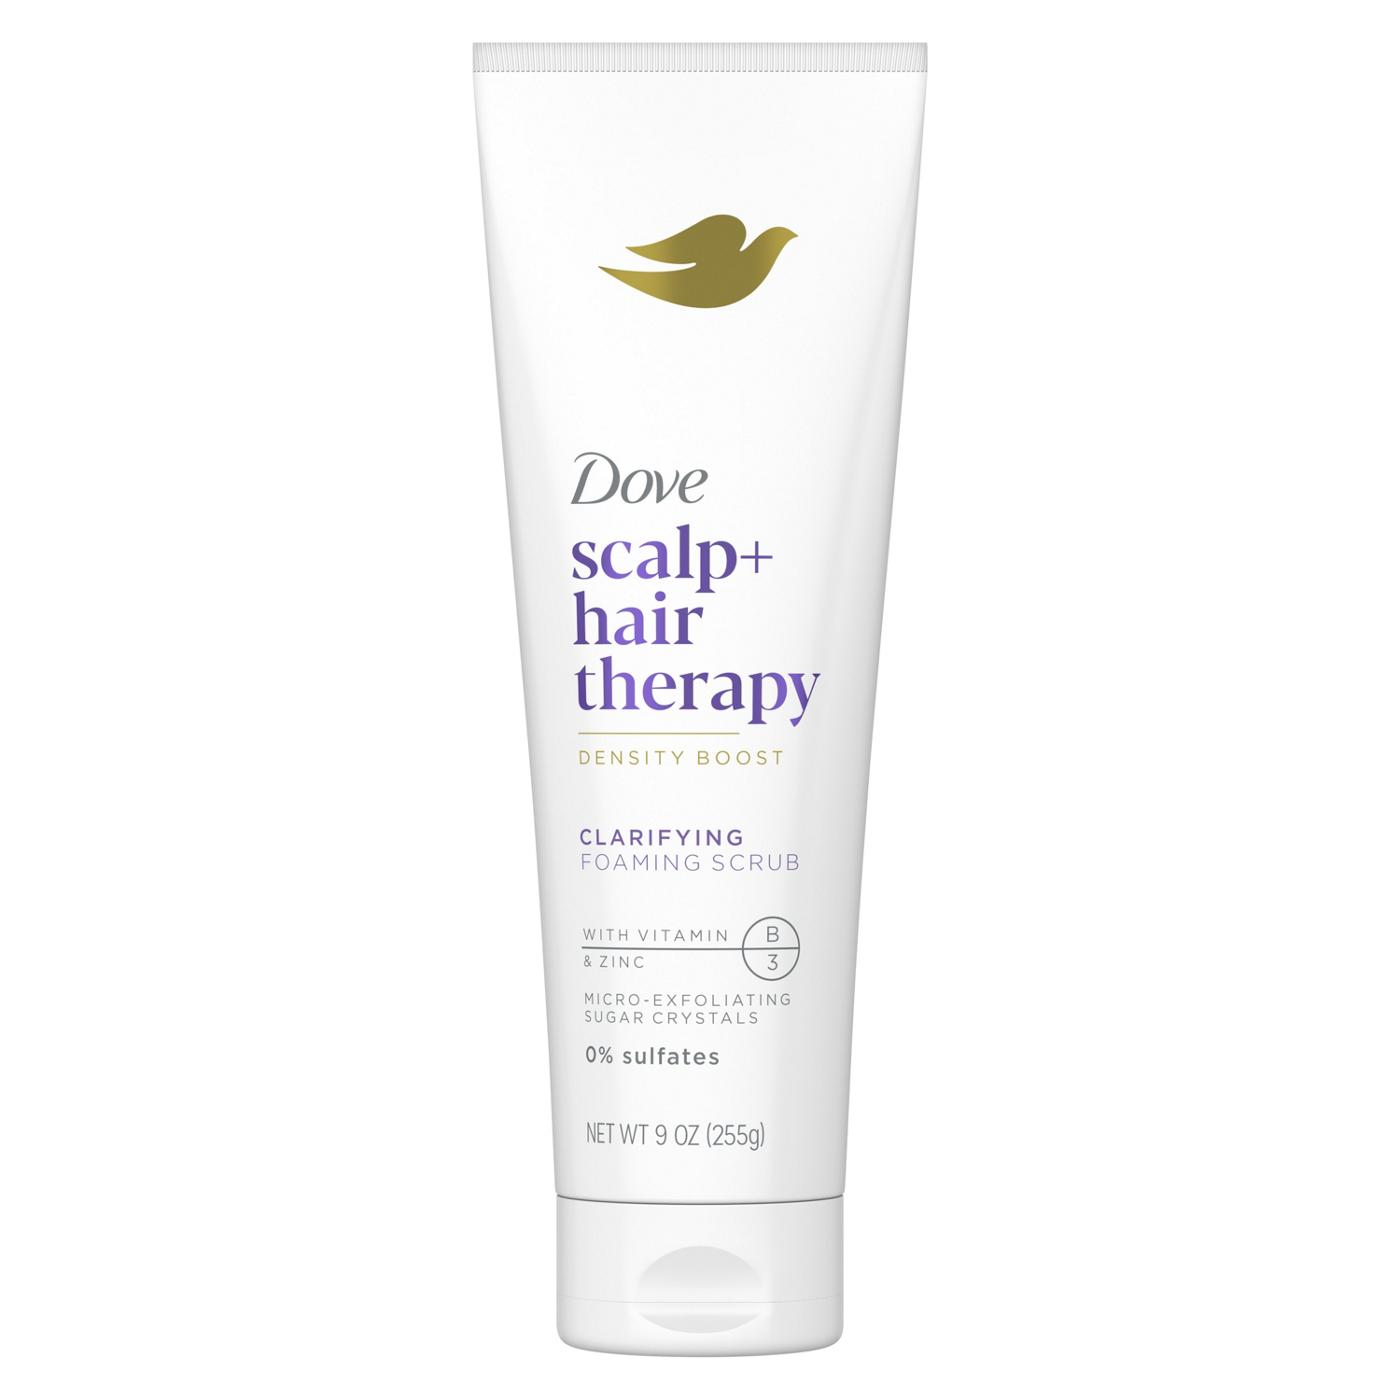 Dove Scalp+ Hair Therapy Clarifying Foaming Scrub; image 1 of 3